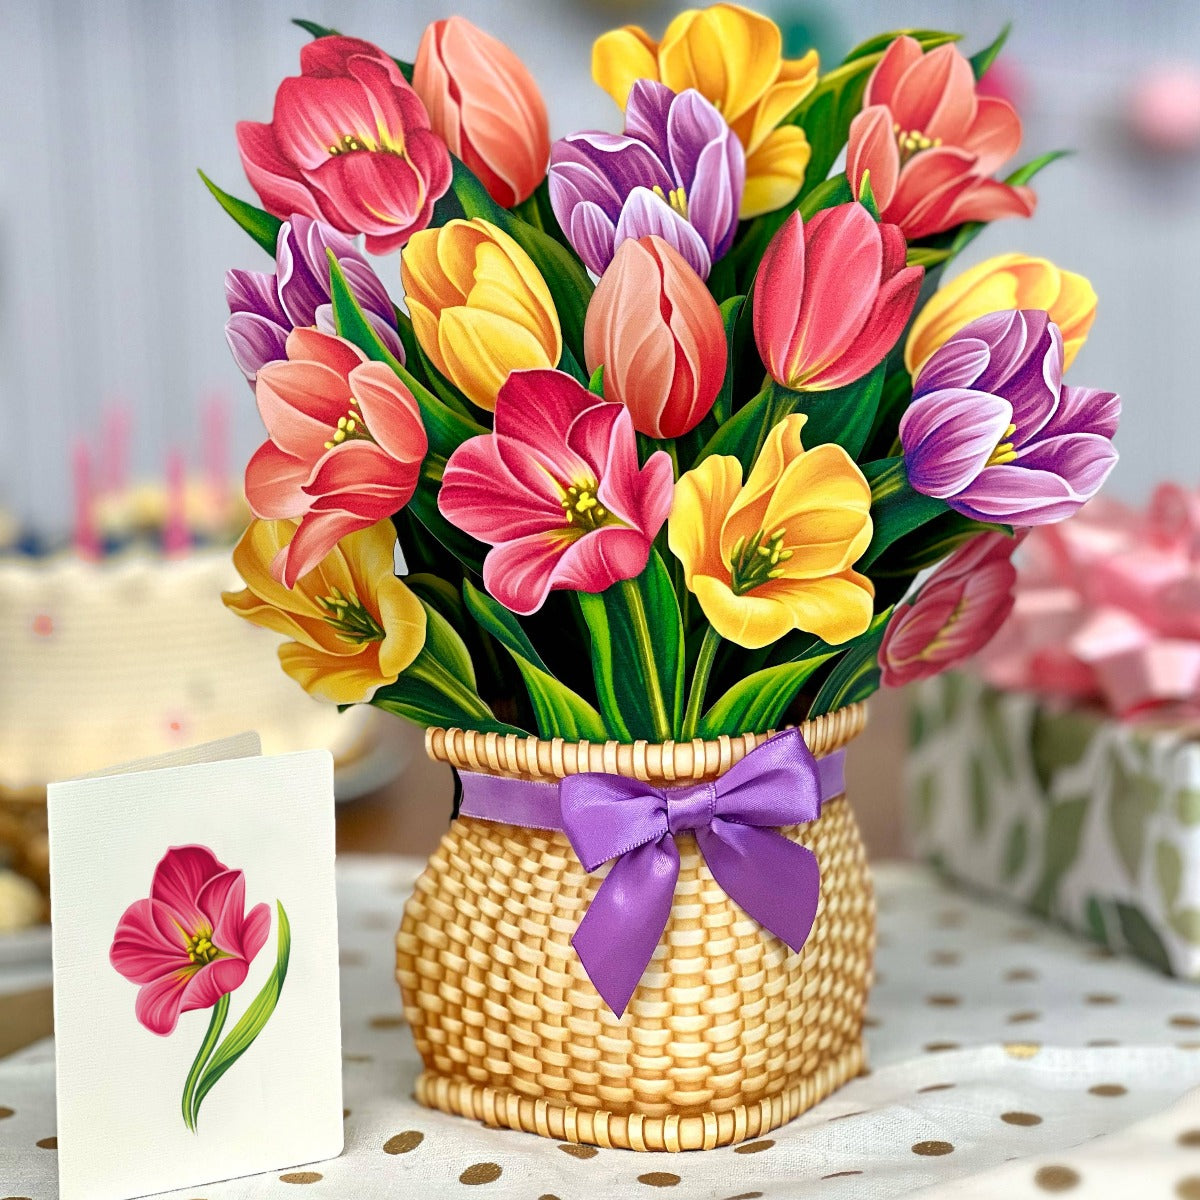 Festive Tulips Pop-up Greeting Card- A perfect gift Media 1 of 2